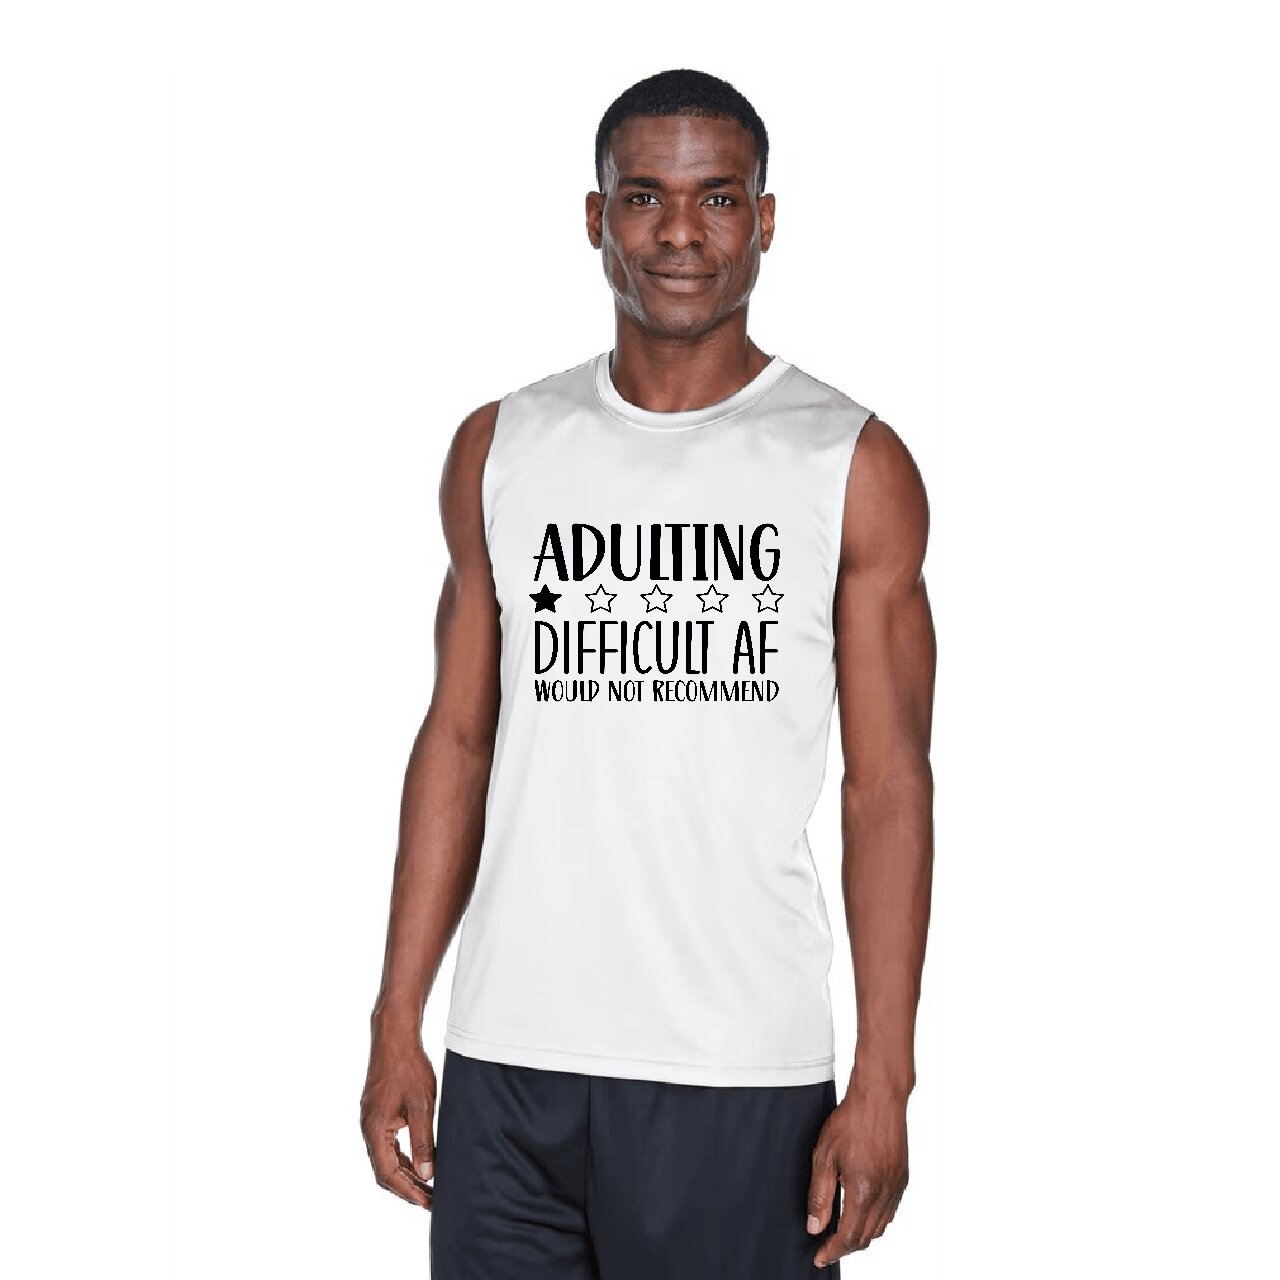 Adulting 1 Star Difficult AF Would Not Recommend - Tank Top